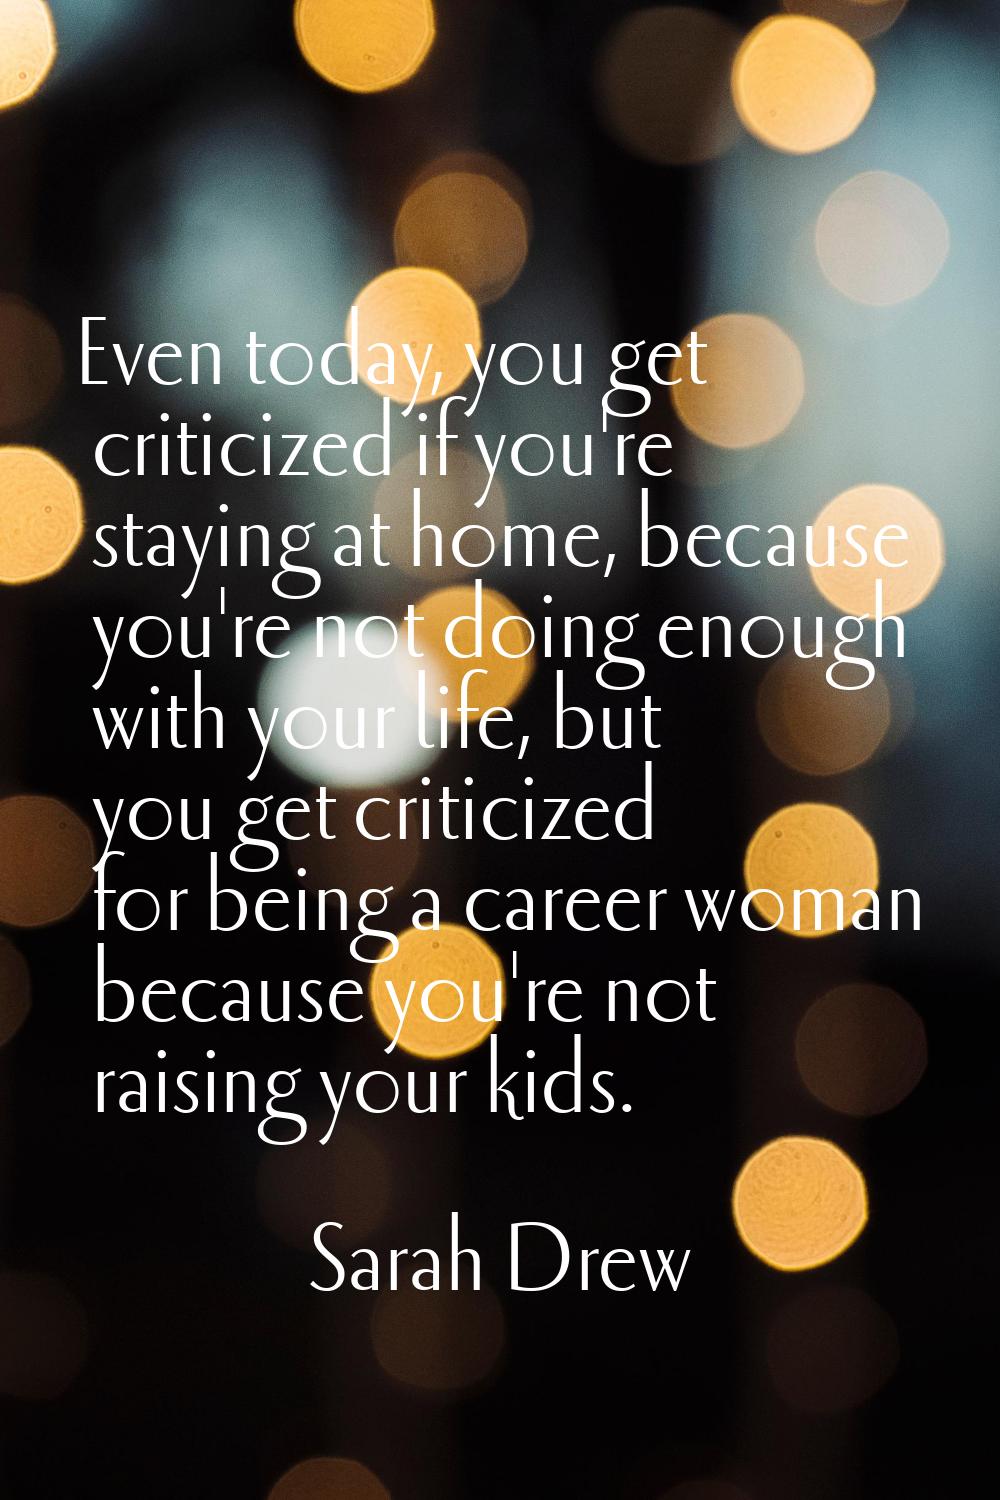 Even today, you get criticized if you're staying at home, because you're not doing enough with your